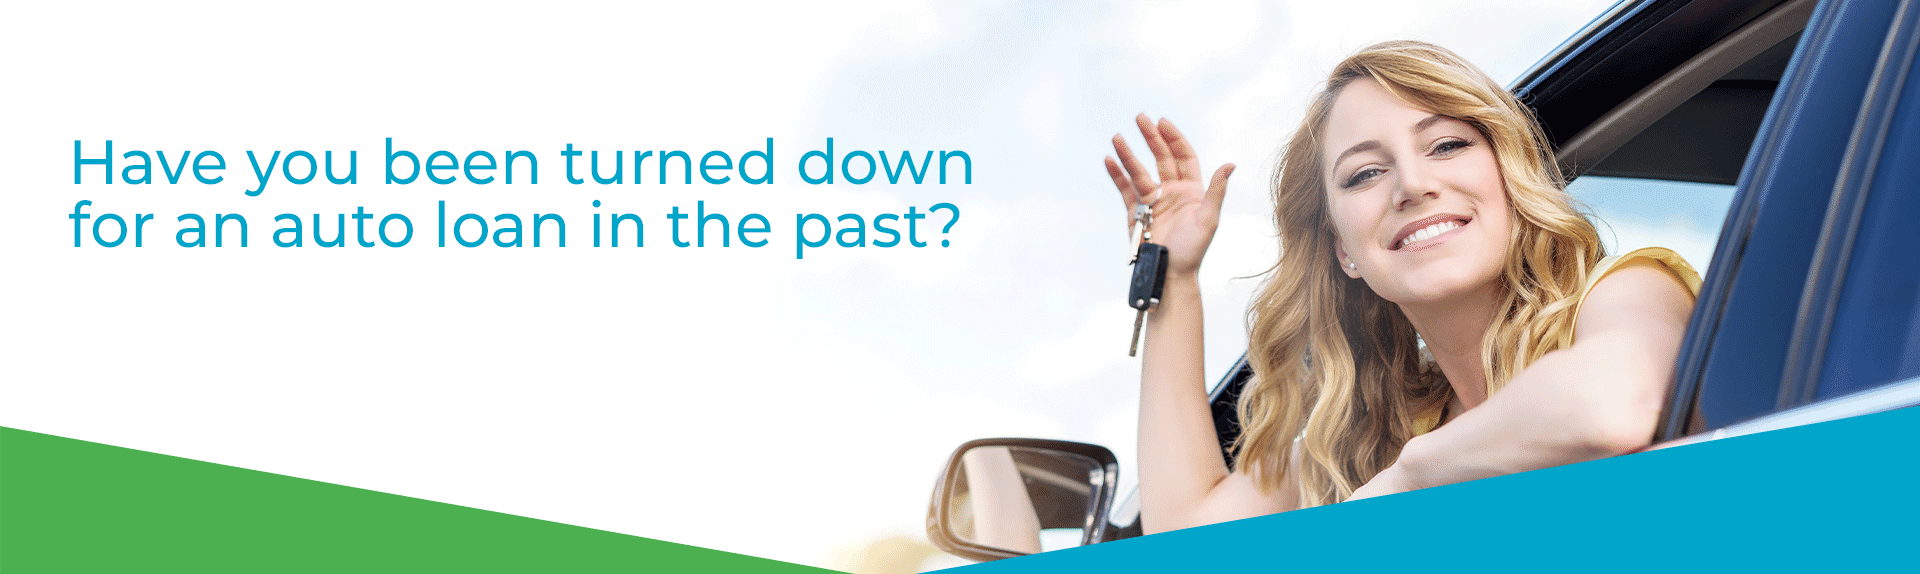 Have you been turned down for an auto loan in the past? We can help!